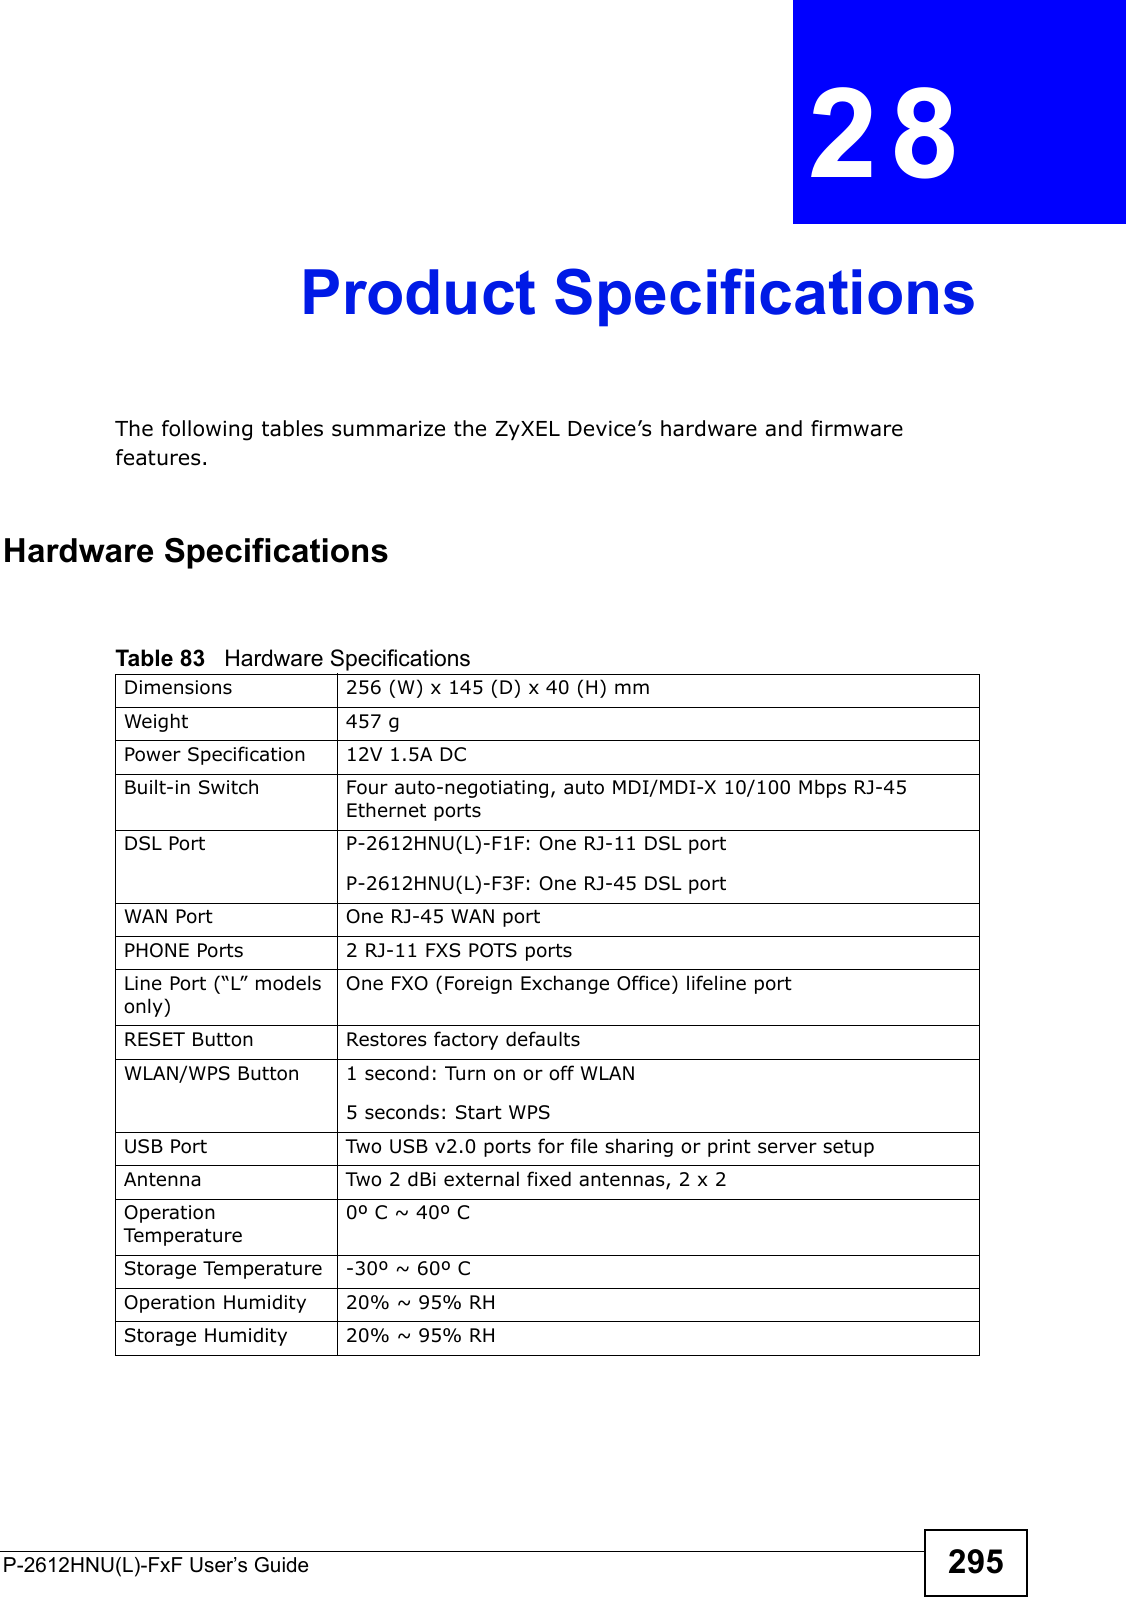 P-2612HNU(L)-FxF User’s Guide 295CHAPTER   28 Product SpecificationsThe following tables summarize the ZyXEL Device’s hardware and firmware features.Hardware SpecificationsTable 83   Hardware SpecificationsDimensions 256 (W) x 145 (D) x 40 (H) mmWeight 457 gPower Specification 12V 1.5A DCBuilt-in Switch Four auto-negotiating, auto MDI/MDI-X 10/100 Mbps RJ-45Ethernet portsDSL Port P-2612HNU(L)-F1F: One RJ-11 DSL portP-2612HNU(L)-F3F: One RJ-45 DSL portWAN Port One RJ-45 WAN portPHONE Ports 2 RJ-11 FXS POTS portsLine Port (“L” models only)One FXO (Foreign Exchange Office) lifeline portRESET Button Restores factory defaultsWLAN/WPS Button 1 second: Turn on or off WLAN5 seconds: Start WPSUSB Port Two USB v2.0 ports for file sharing or print server setupAntenna Two 2 dBi external fixed antennas, 2 x 2 OperationTemperature0º C ~ 40º CStorage Temperature -30º ~ 60º COperation Humidity 20% ~ 95% RHStorage Humidity 20% ~ 95% RH